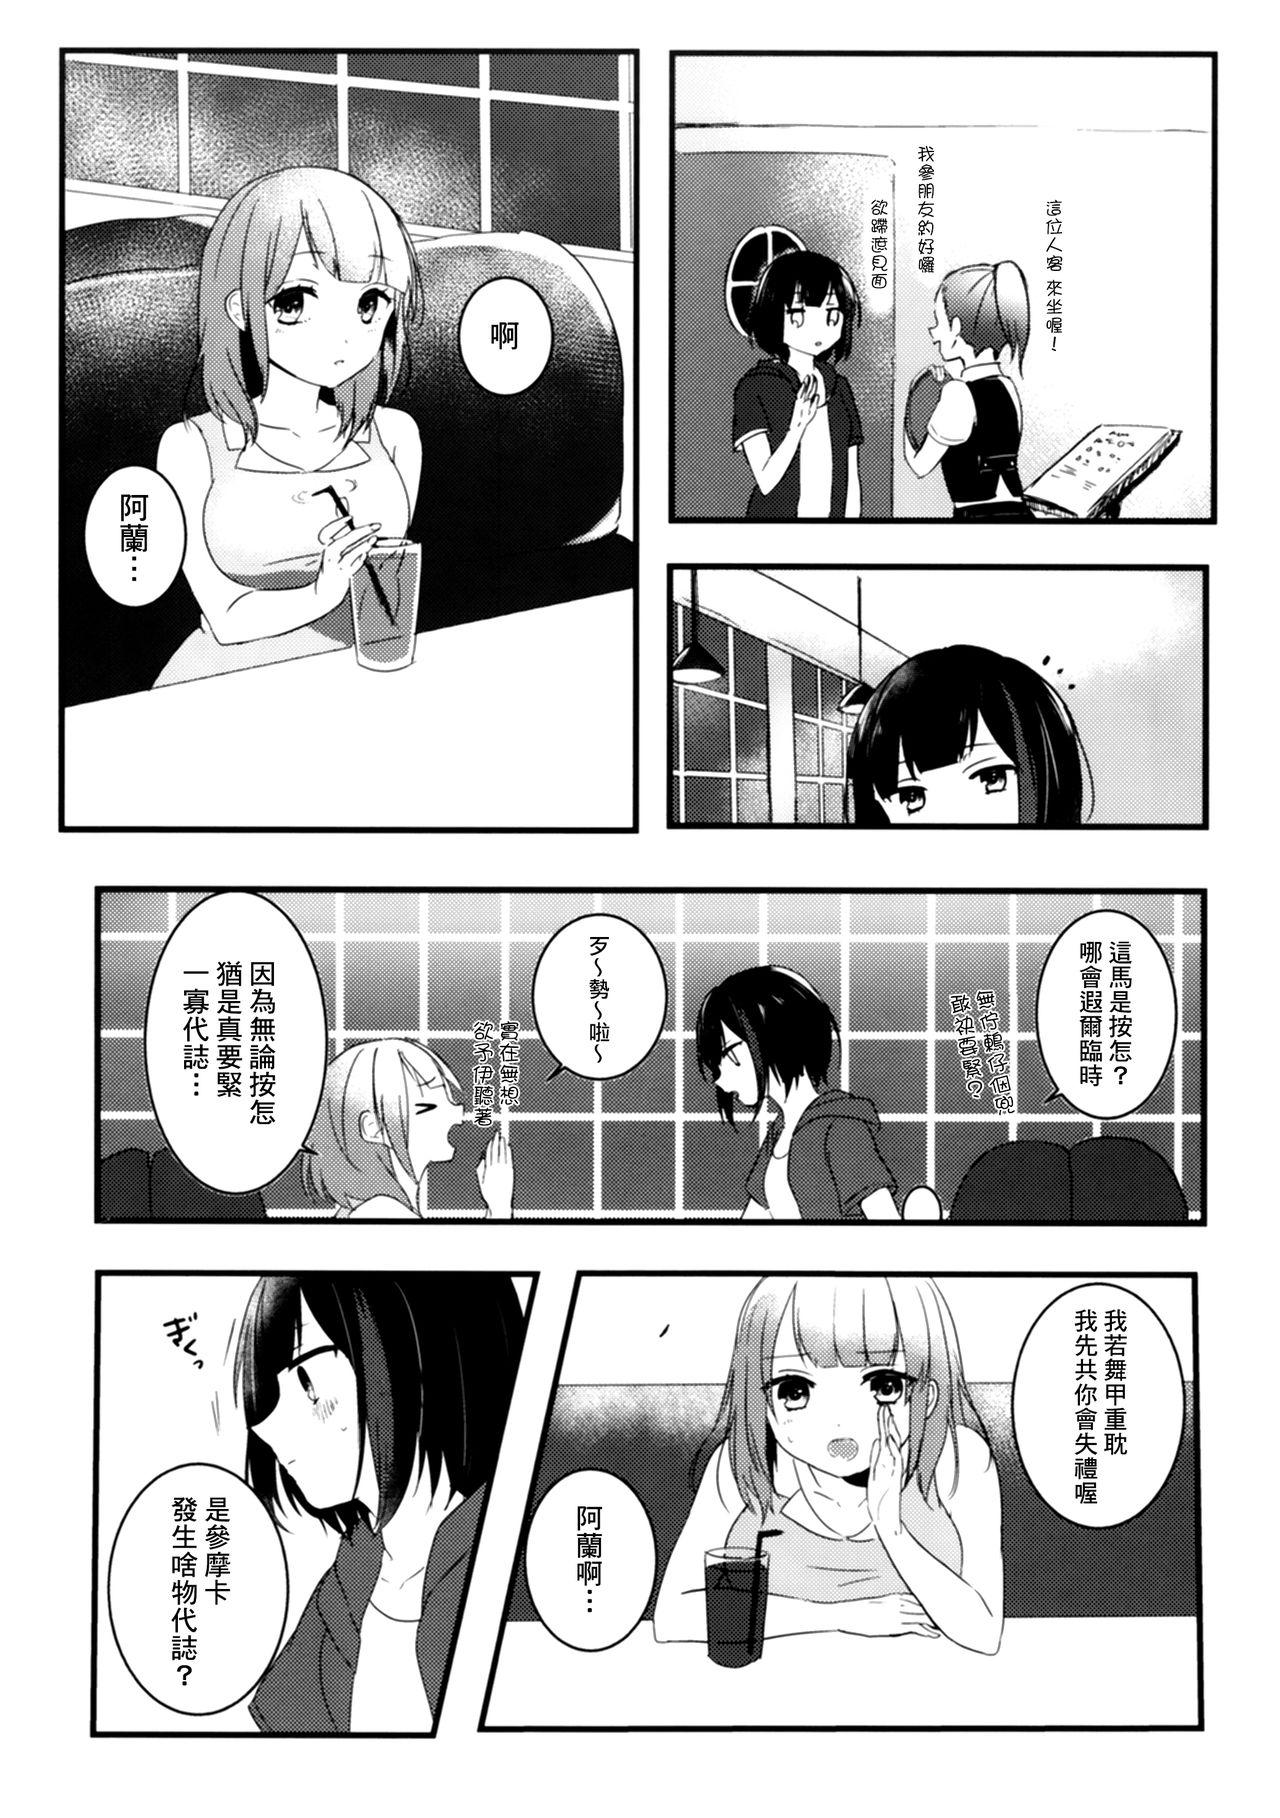 Couple Sex Secret relationship - Bang dream Girls Getting Fucked - Page 7